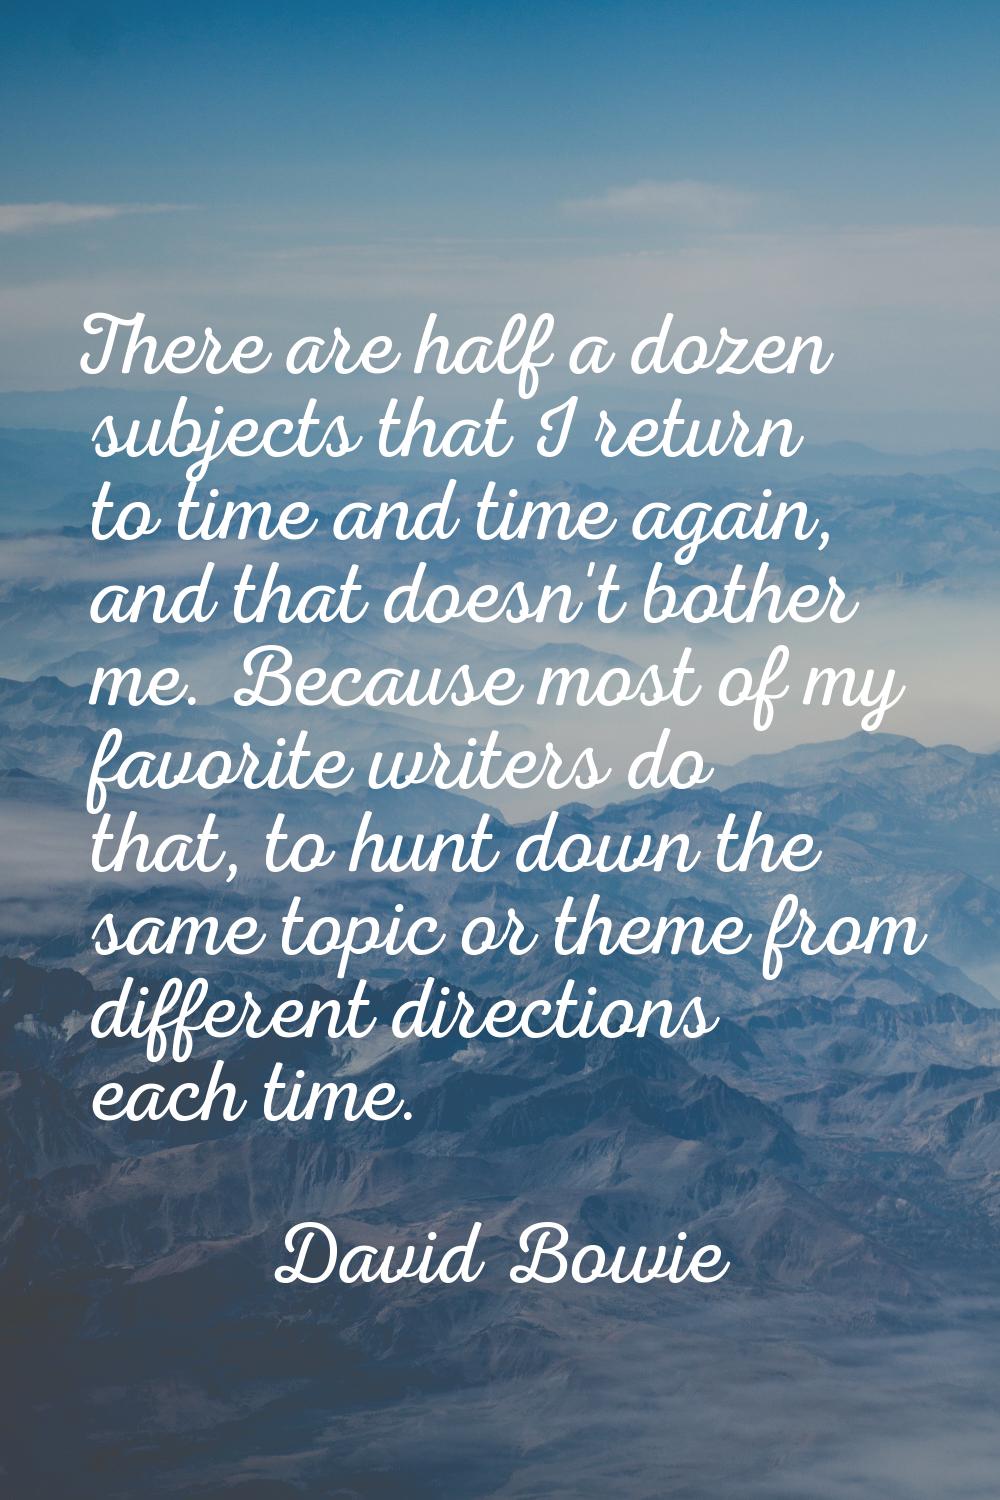 There are half a dozen subjects that I return to time and time again, and that doesn't bother me. B